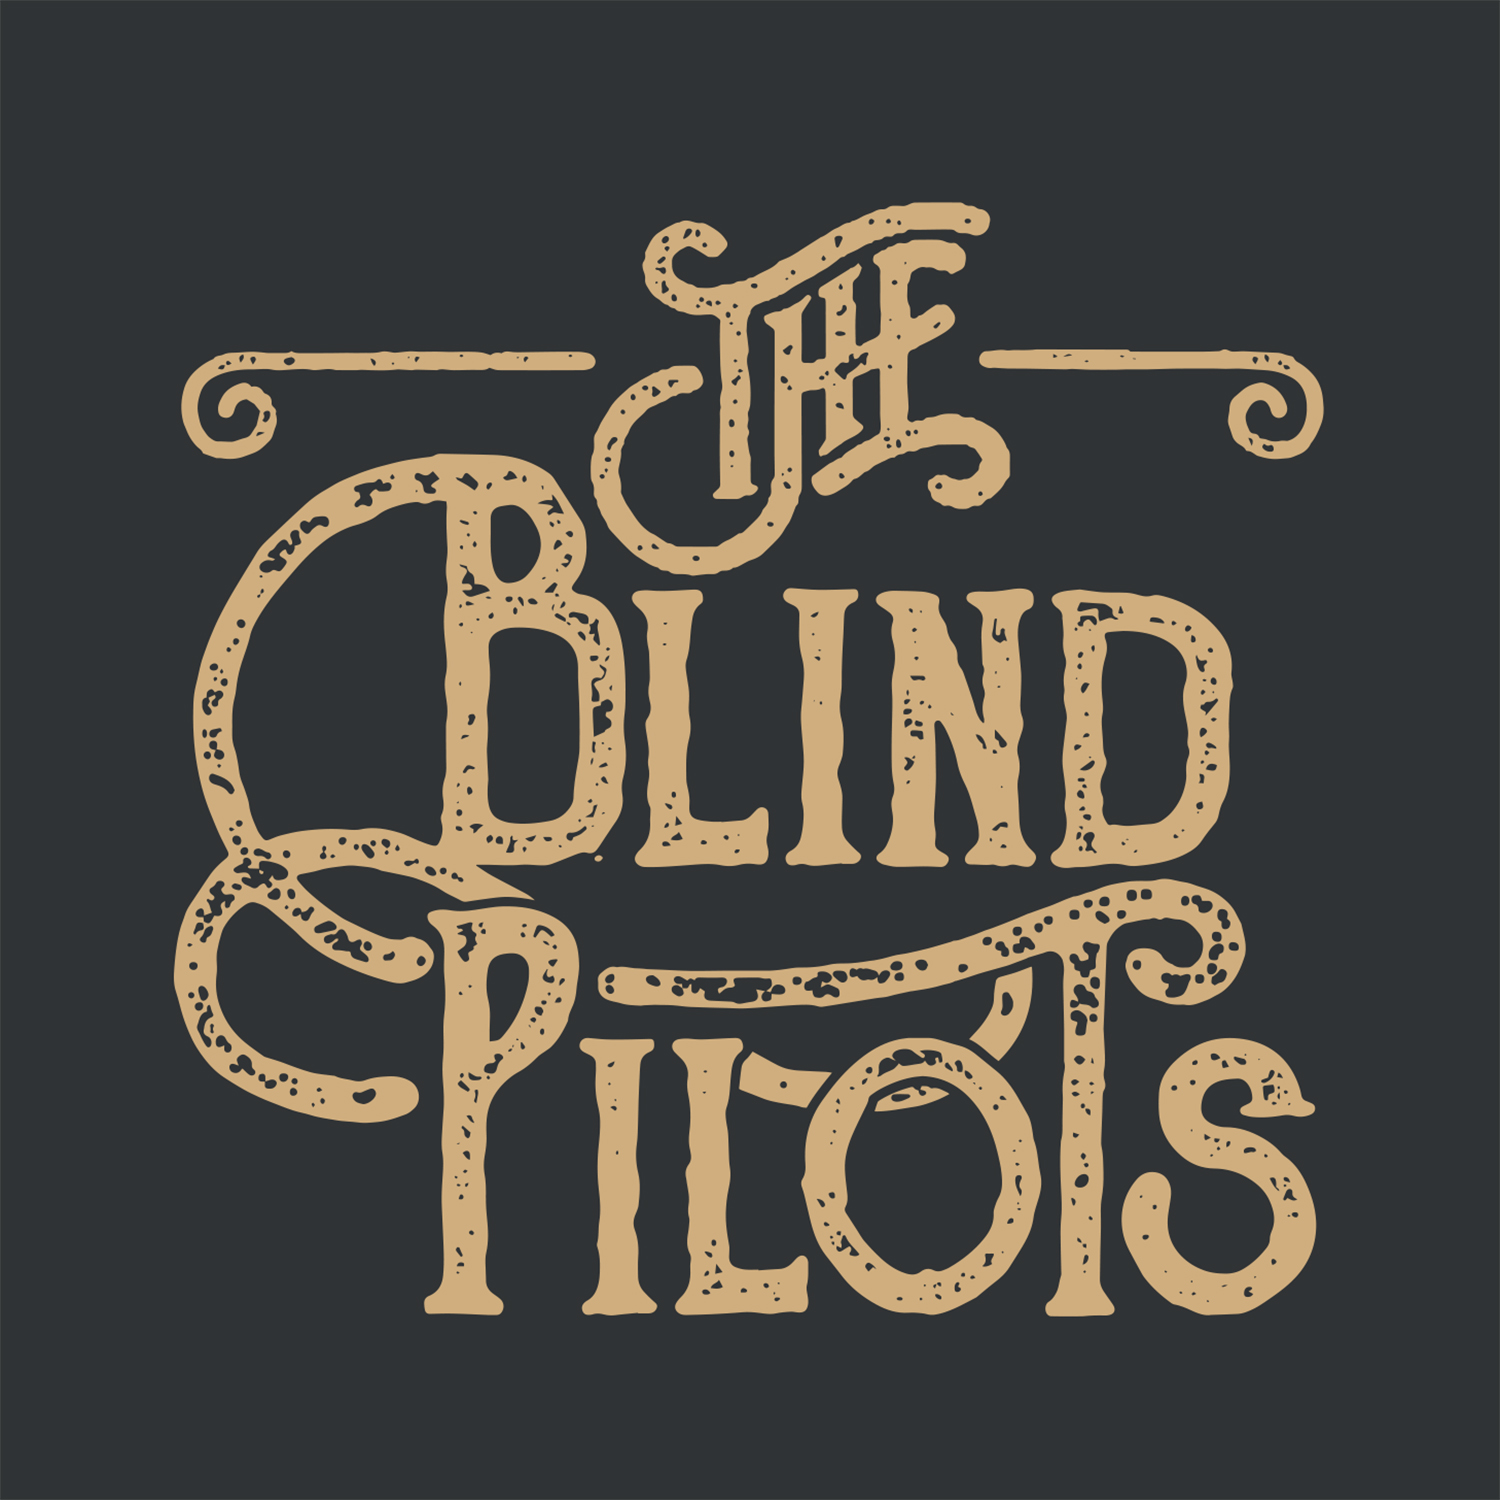 THE BLIND PILOTS CD COVER(12.5X12.5)_1